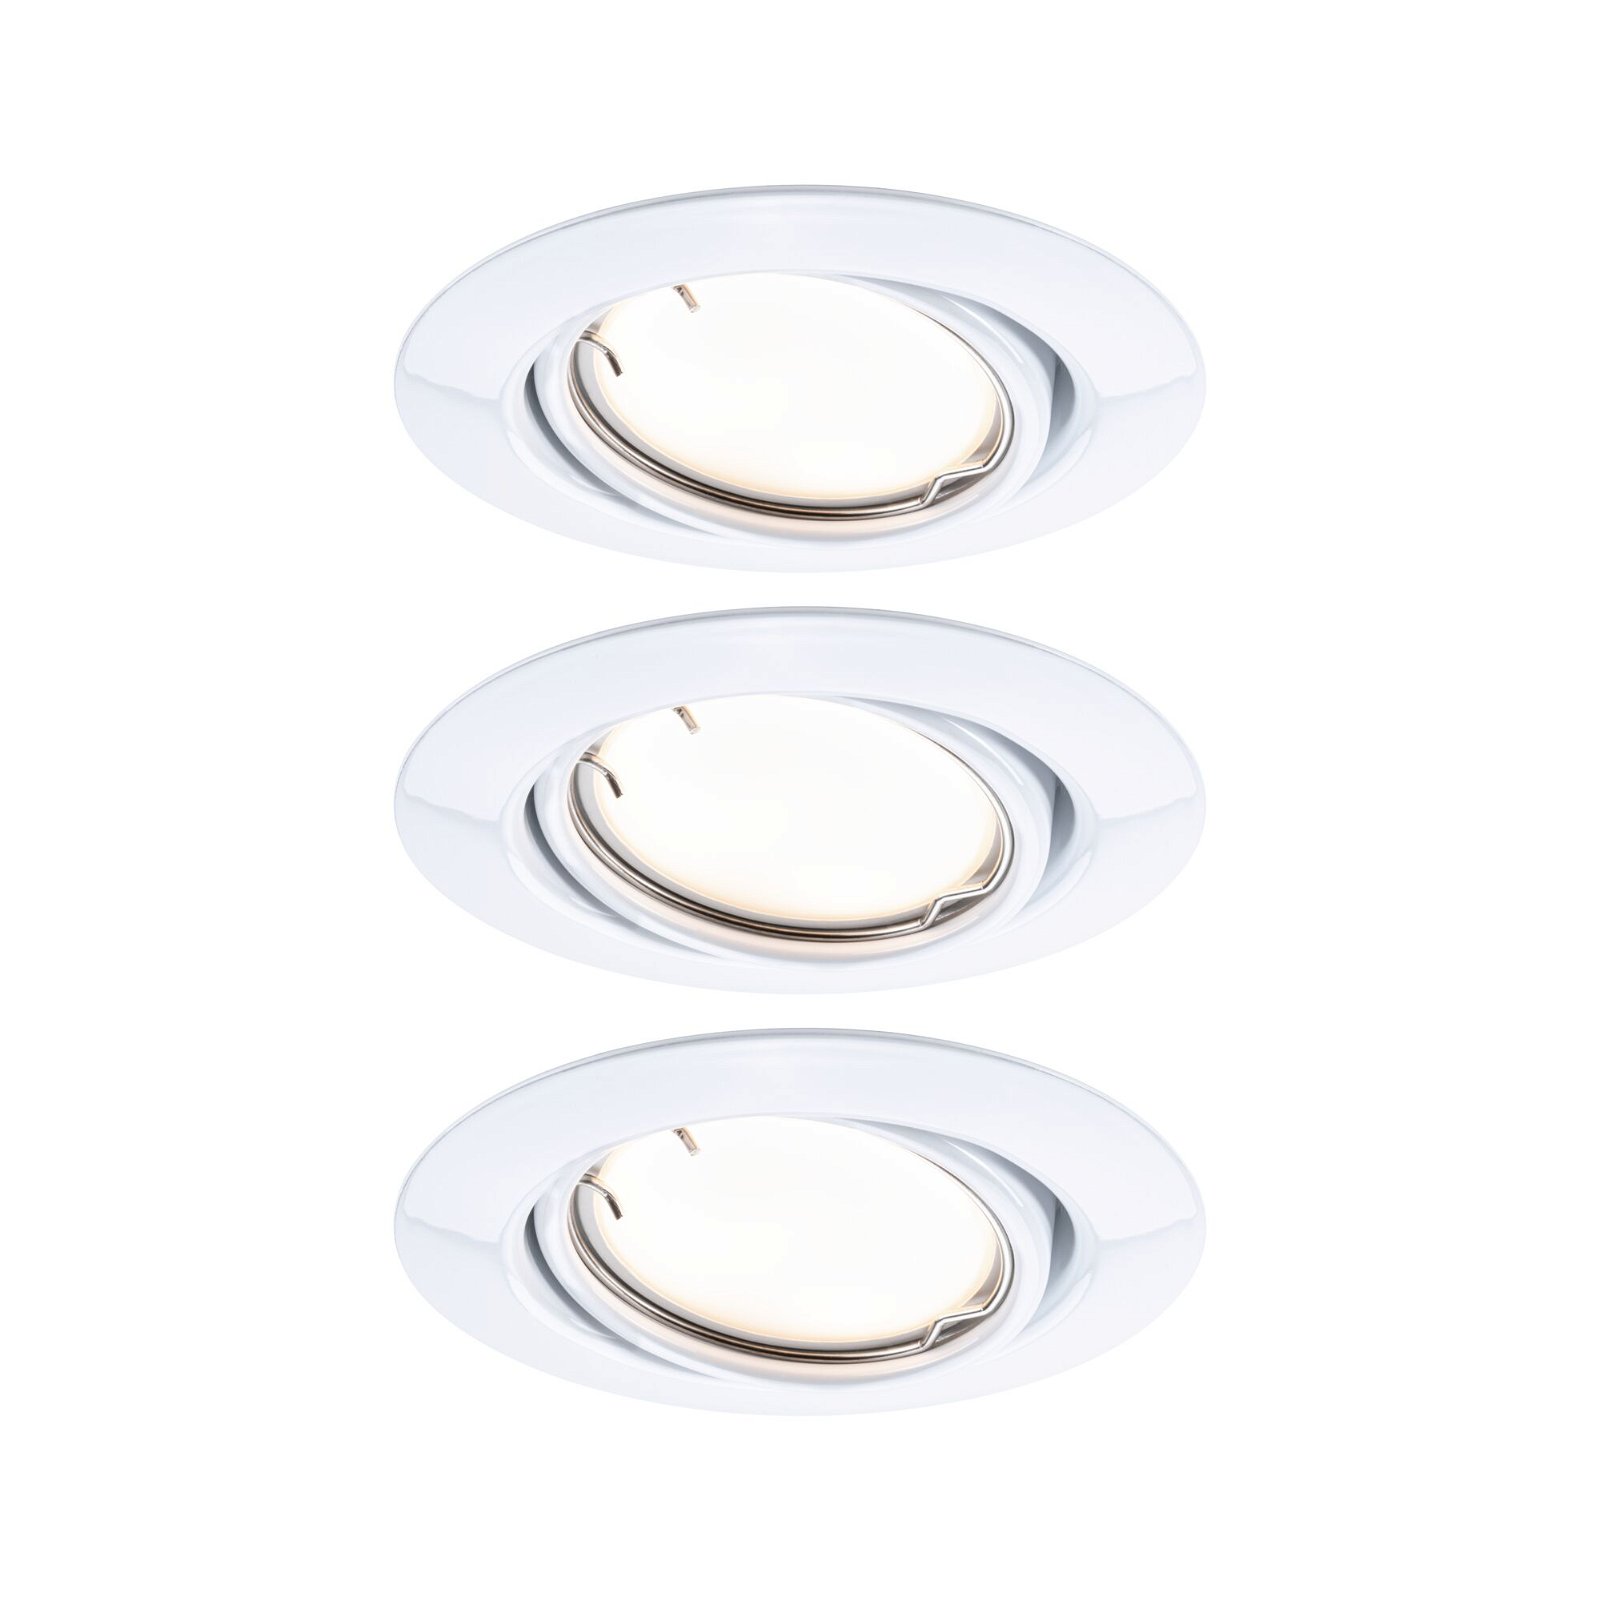 LED Recessed luminaire Smart Home Zigbee 3.0 Base Coin Basic Set Swivelling round 90mm 20° 3x4,9W 3x430lm 230V dimmable 3000K White